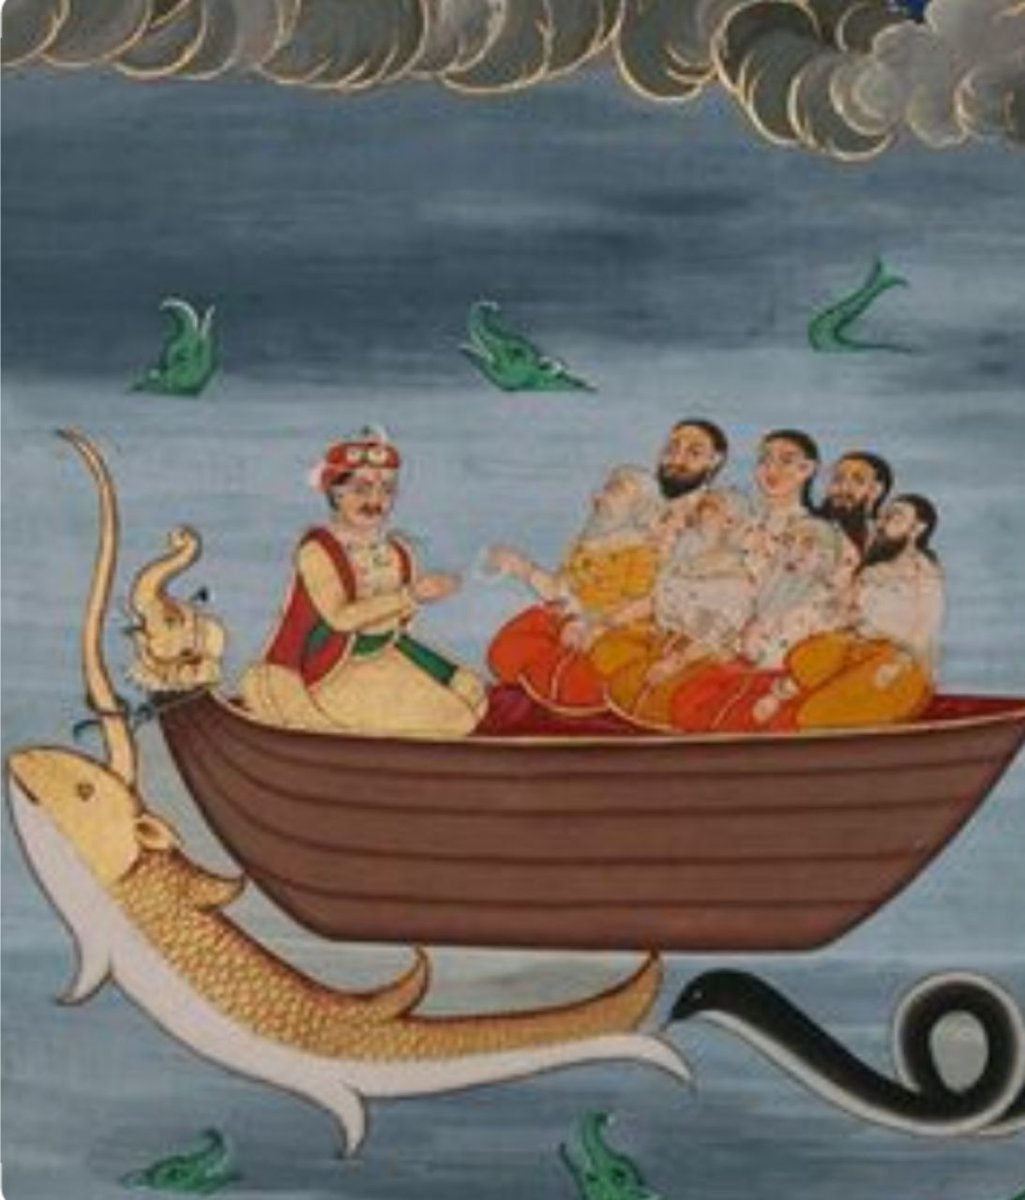 Once there was a demon called Hayagriva with the face of a horse, who stole the Vedas from Brahma, the creator and had disappeared into the oceans. During those times, there was highly virtuous and pious king named Satryavrata who ruled over the southern part of the Bharatvarsha